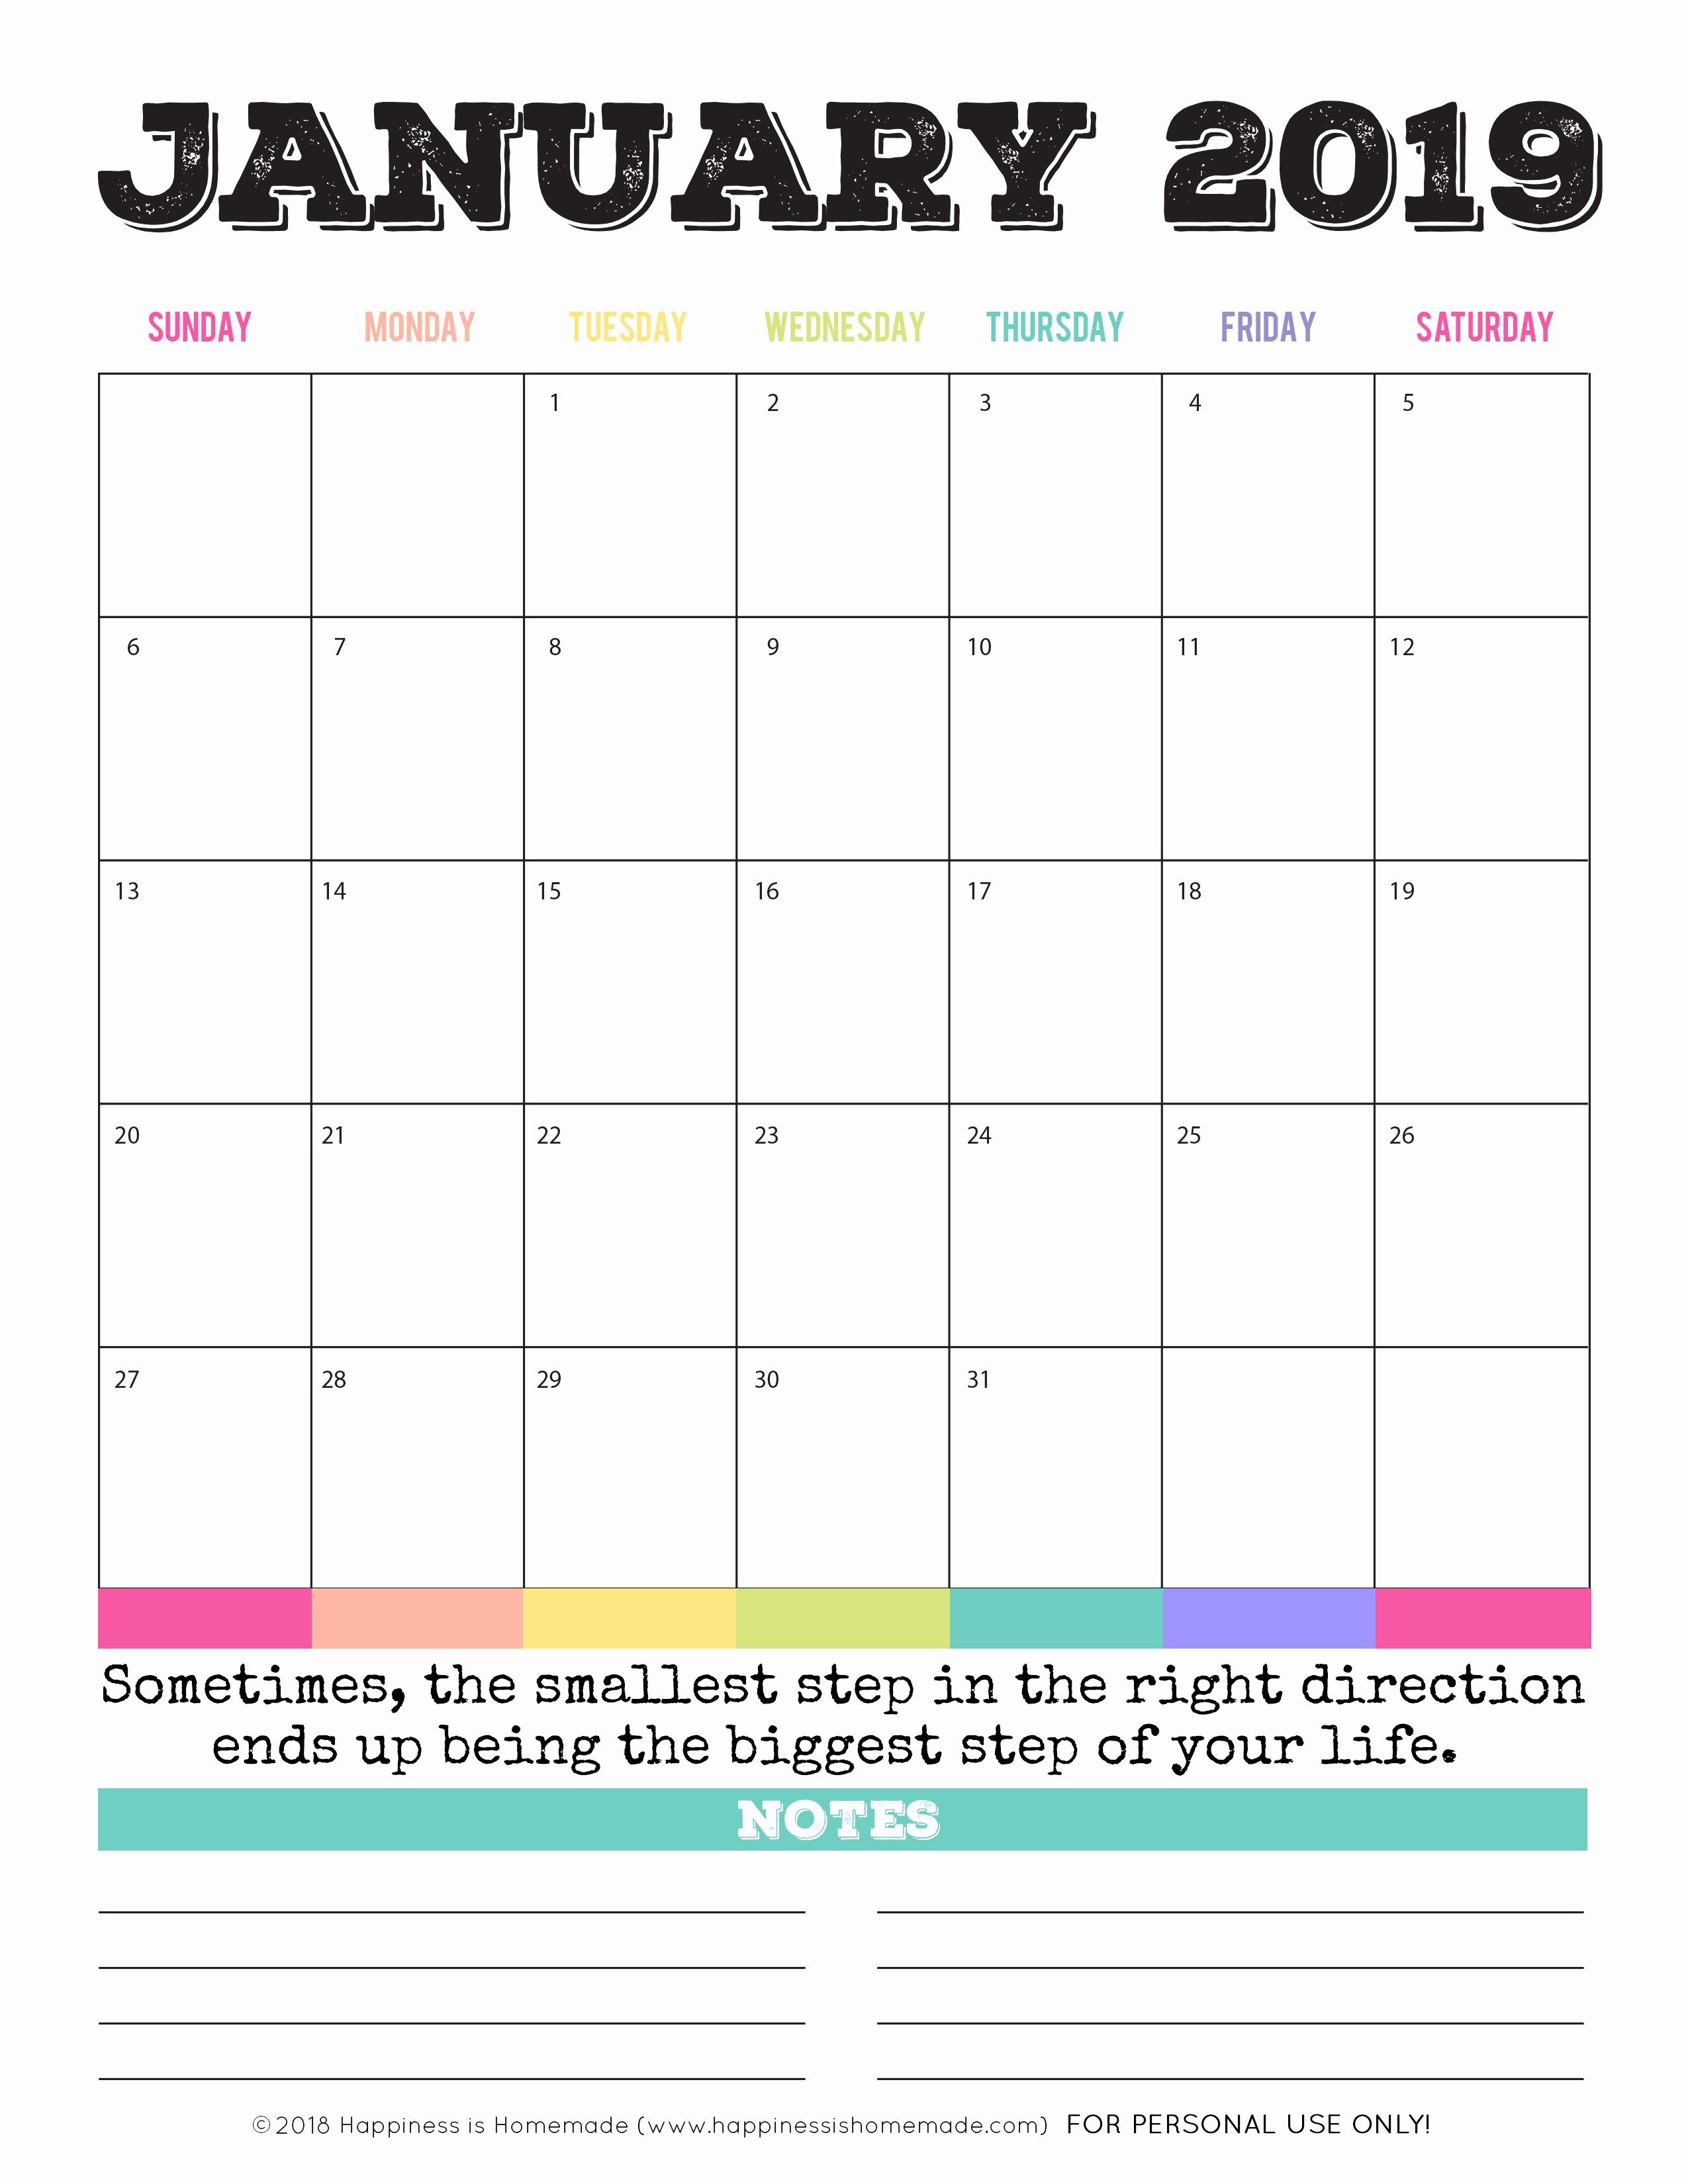 2019 Printable Calendar by Month Luxury 2019 Free Printable Calendar Printable Monthly Calendar